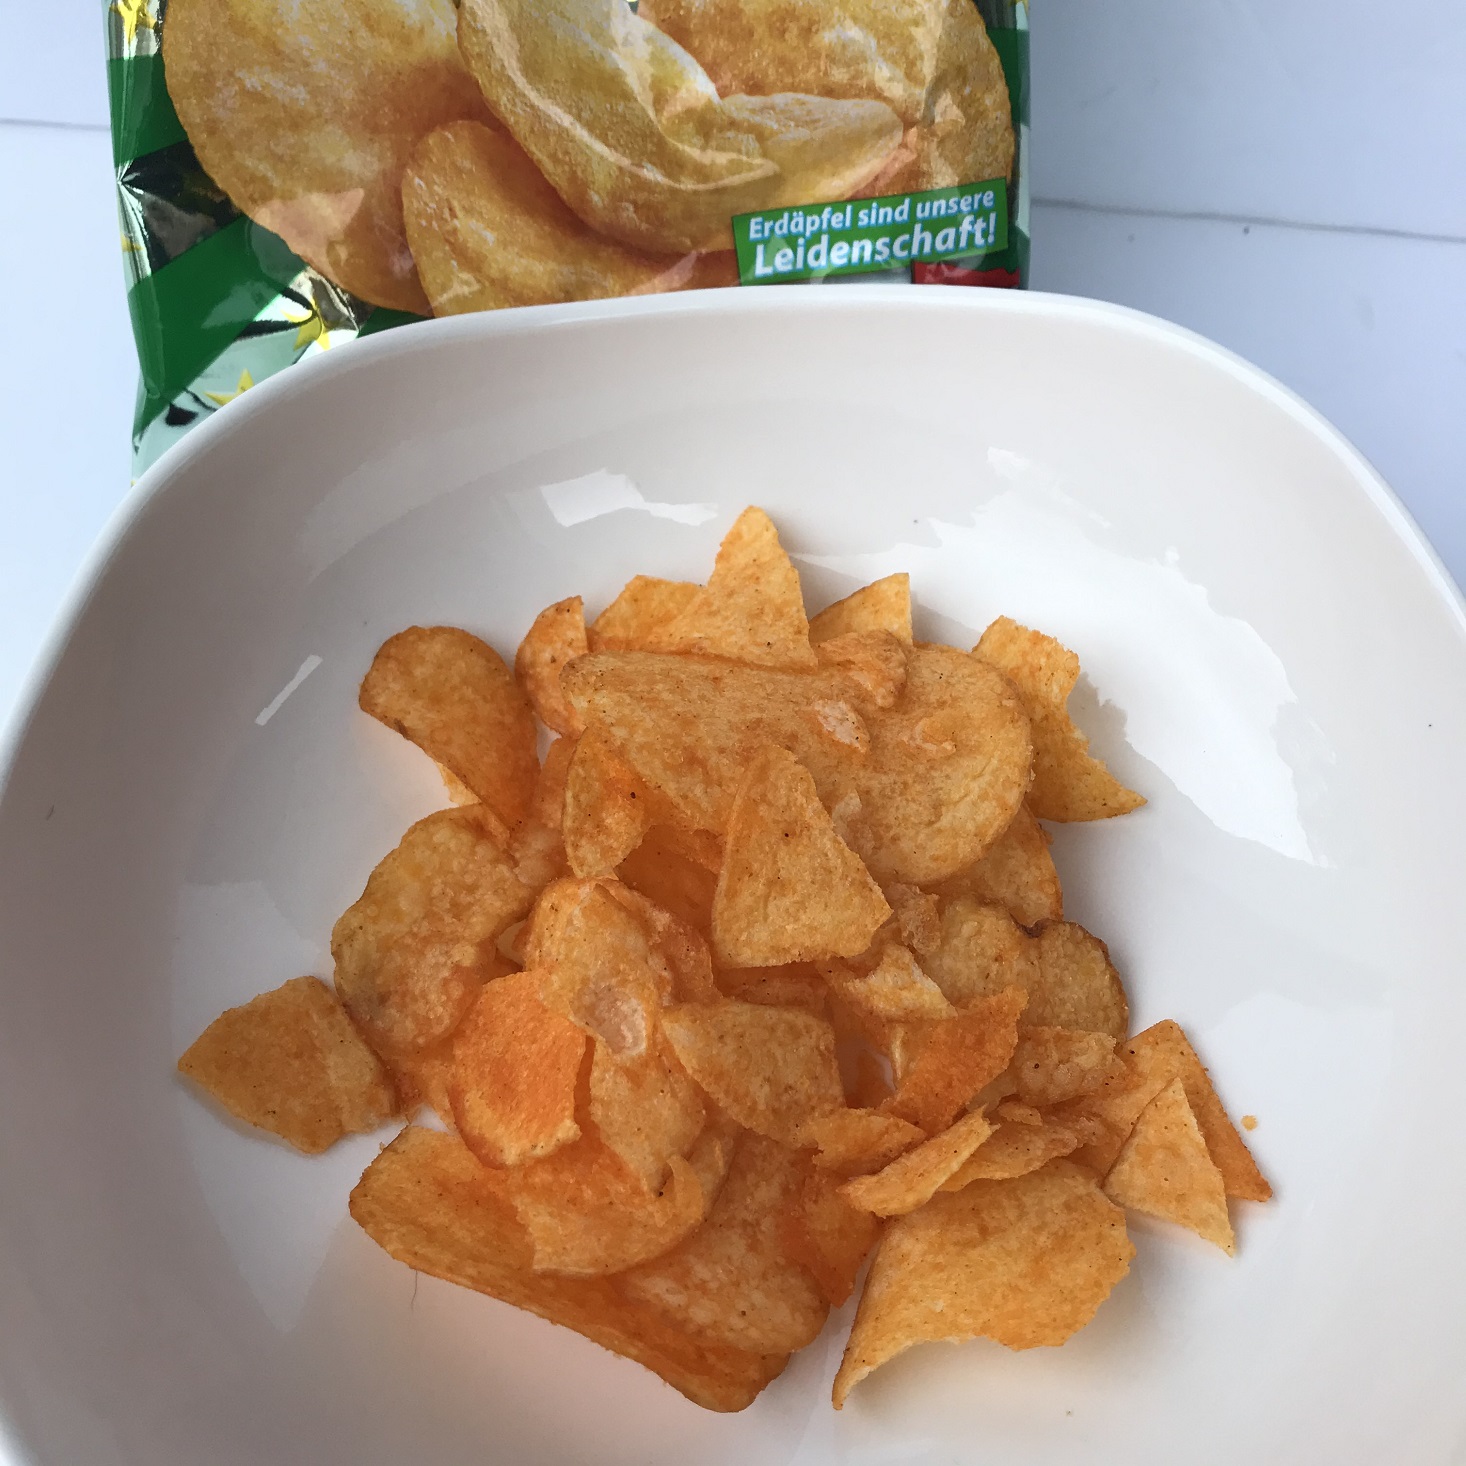 Universal Yums Oct 2019 paprika chips opened